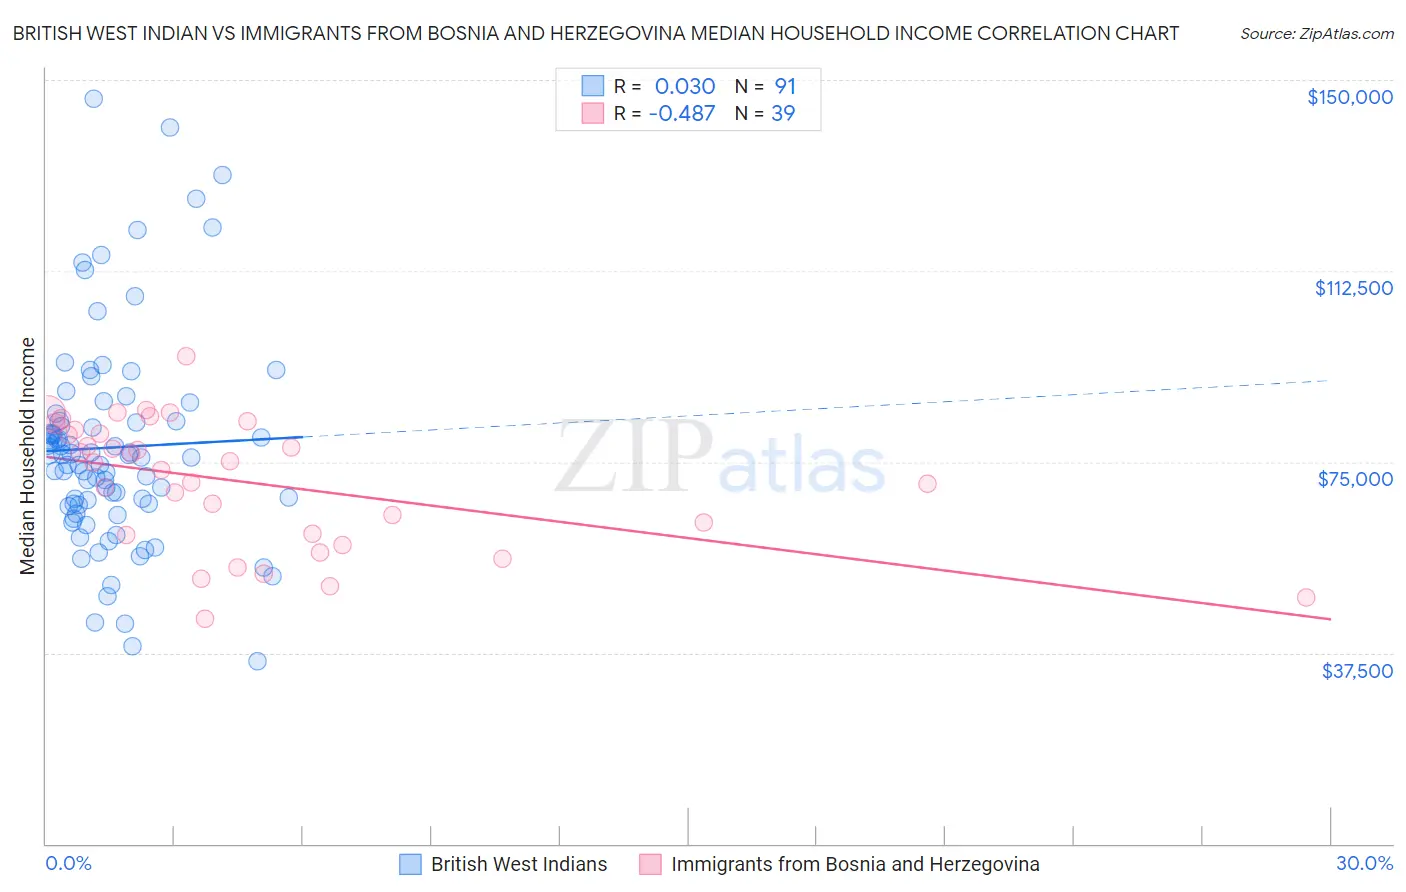 British West Indian vs Immigrants from Bosnia and Herzegovina Median Household Income